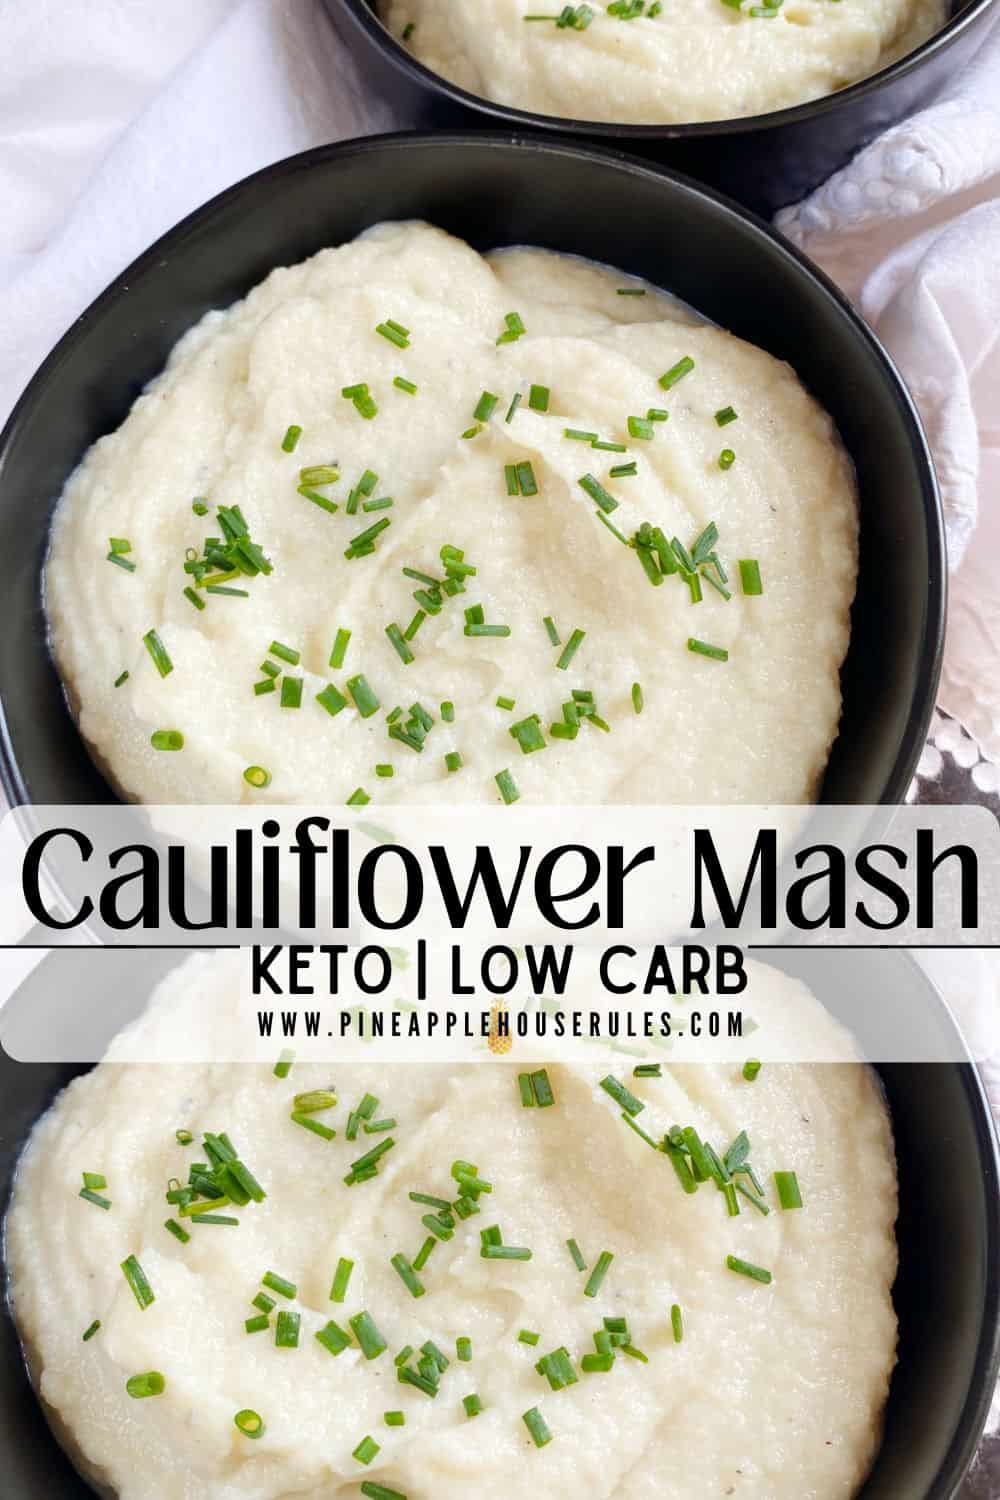 This Keto Cauliflower Mash is an easy, low carb substitute for mashed potatoes! Roasted garlic, ricotta, and a little butter make this a delicious side! You can make this in batches and freeze the leftovers for another time, too. Keto Cauliflower Mash | Cauliflower Mashed Potatoes | Cauliflower Mashed Potatoes Keto | Cauliflower Mashed Potatoes Easy | Cauliflower Mash Recipes | Cauliflower Mashed Potatoes Healthy | Cauliflower Mash | Keto Recipes Easy | Easy Dinner Recipes | Freezer Friendly